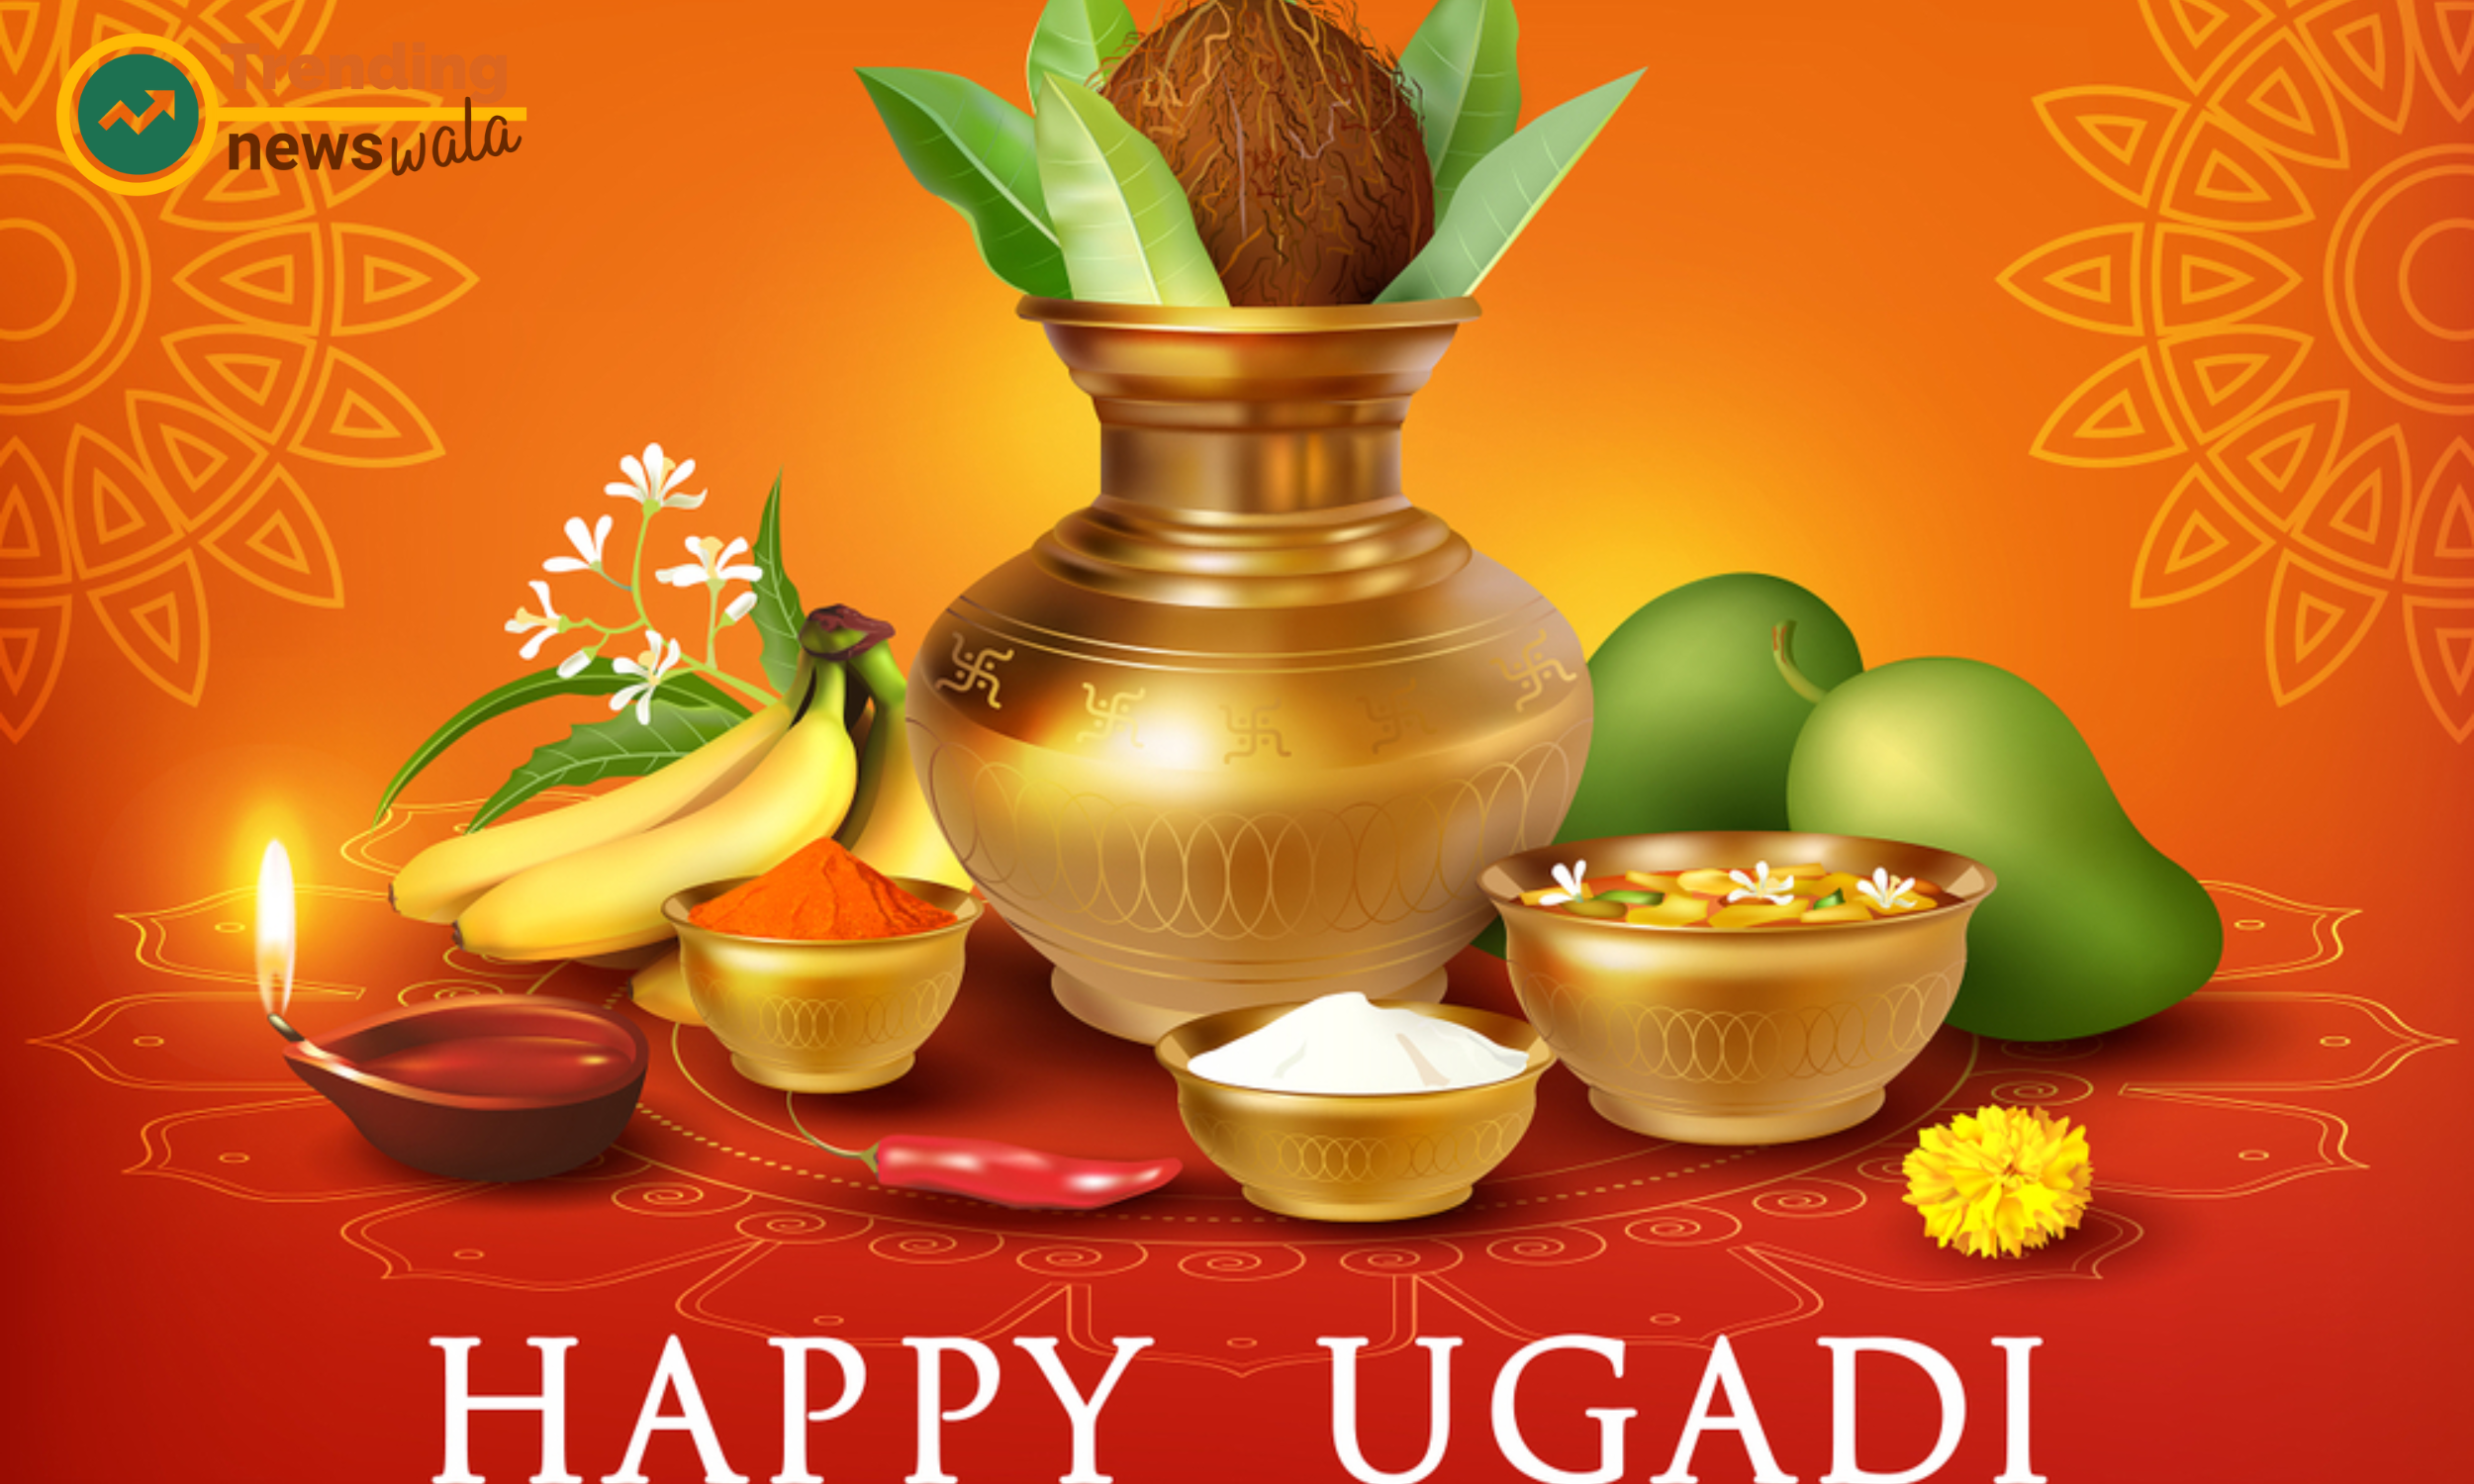 Exchanging gifts is a common practice during Ugadi the Telugu New Year